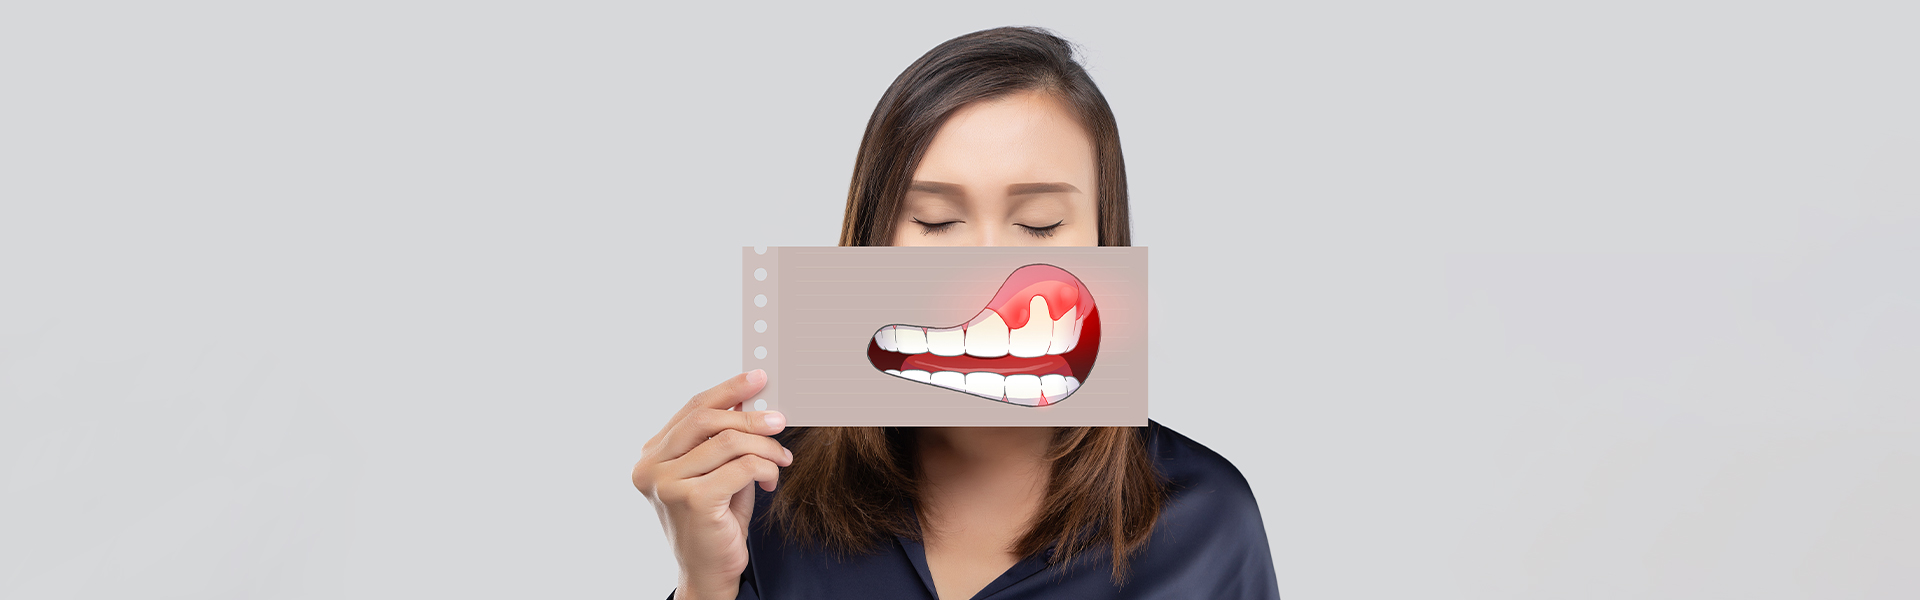 How Do You Cure Gum Disease Without Surgery?